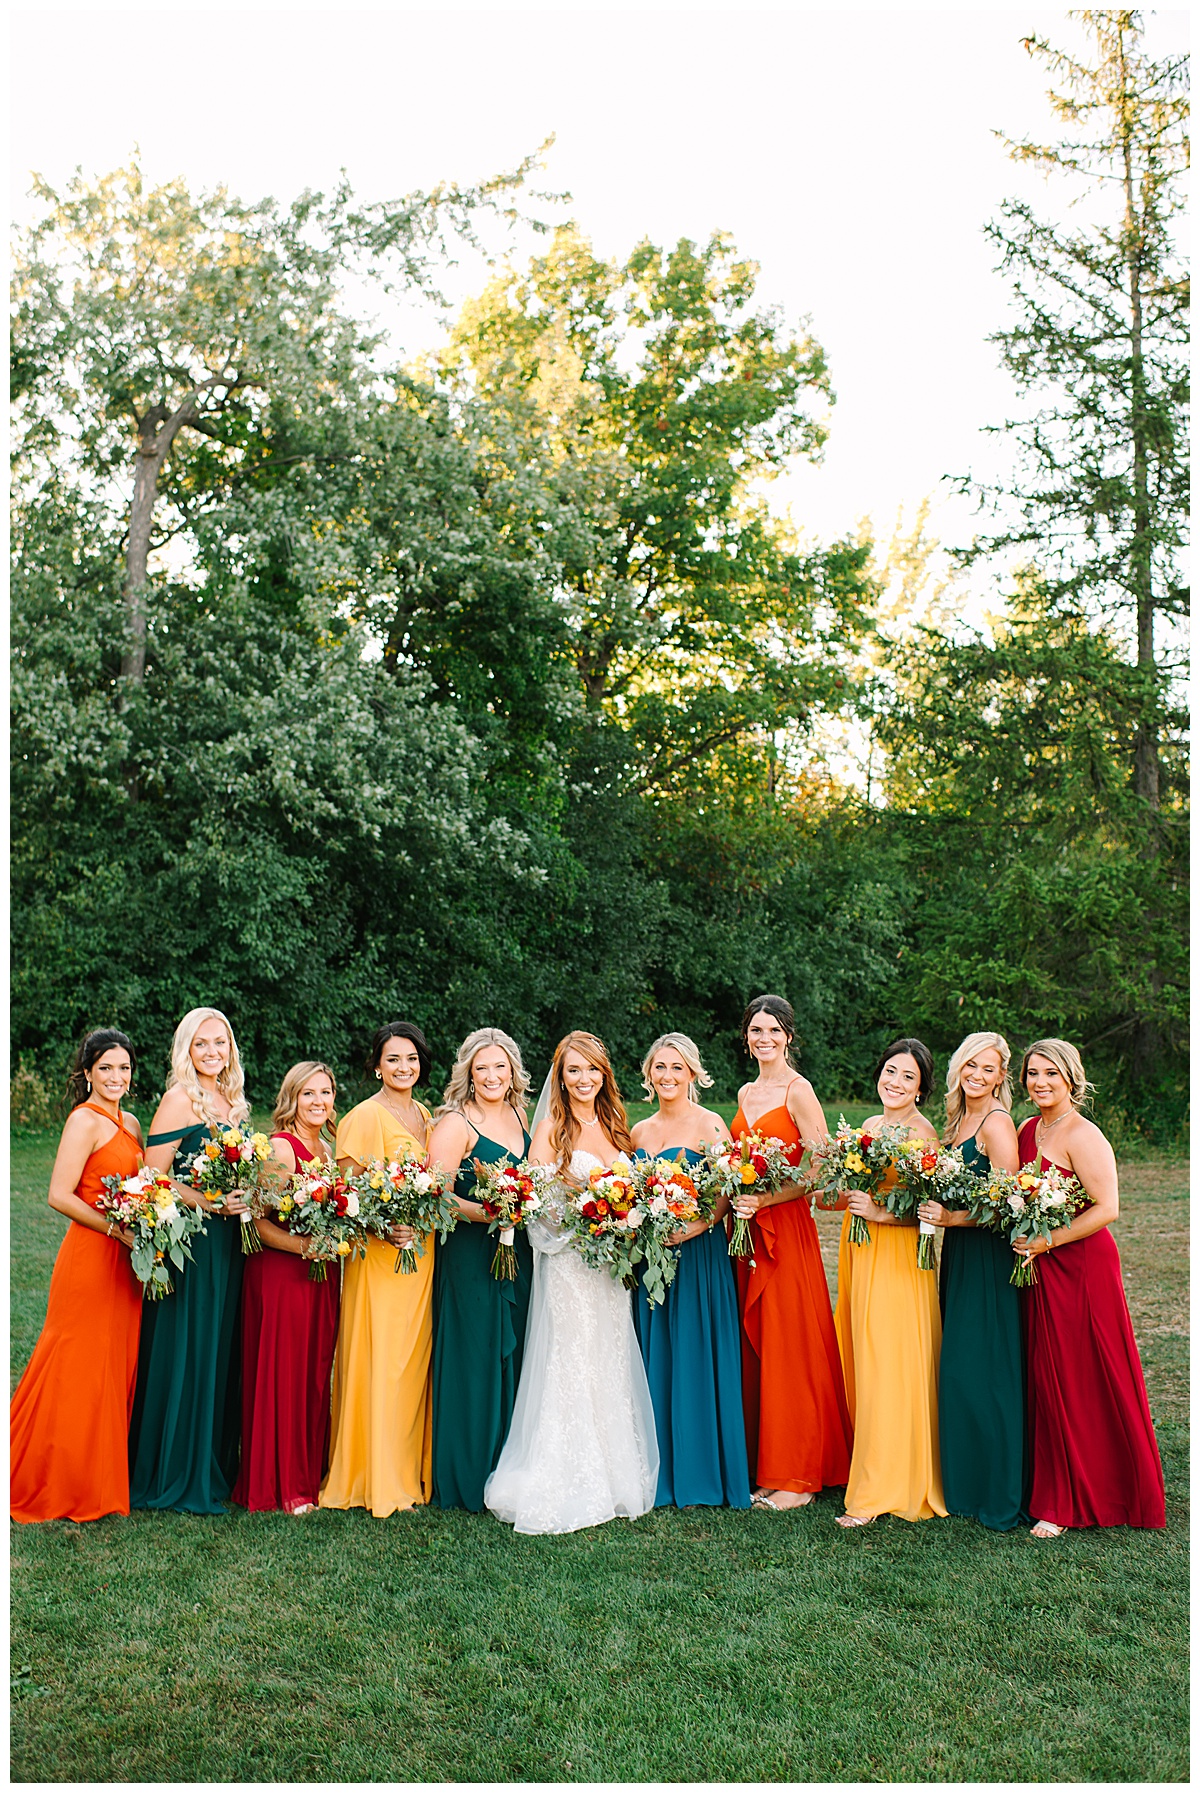 Bride is surrounded by bridesmaids in beautiful colorful dresses for Glen Oaks wedding